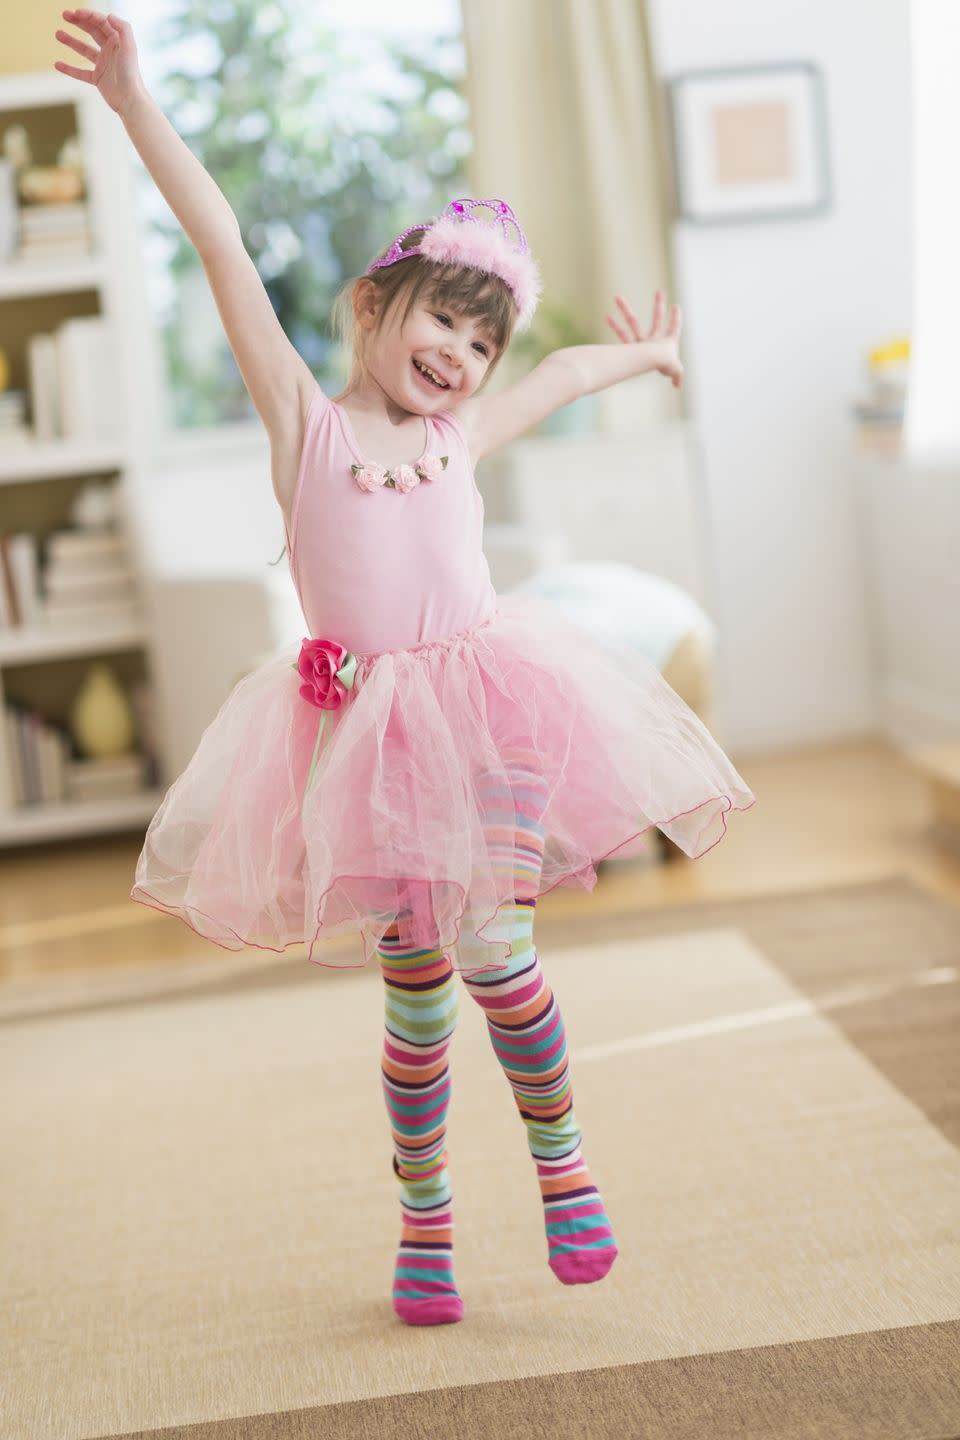 WITH YOUR DAUGHTER: Dress up in tutus (or whatever she wants!) and go out.